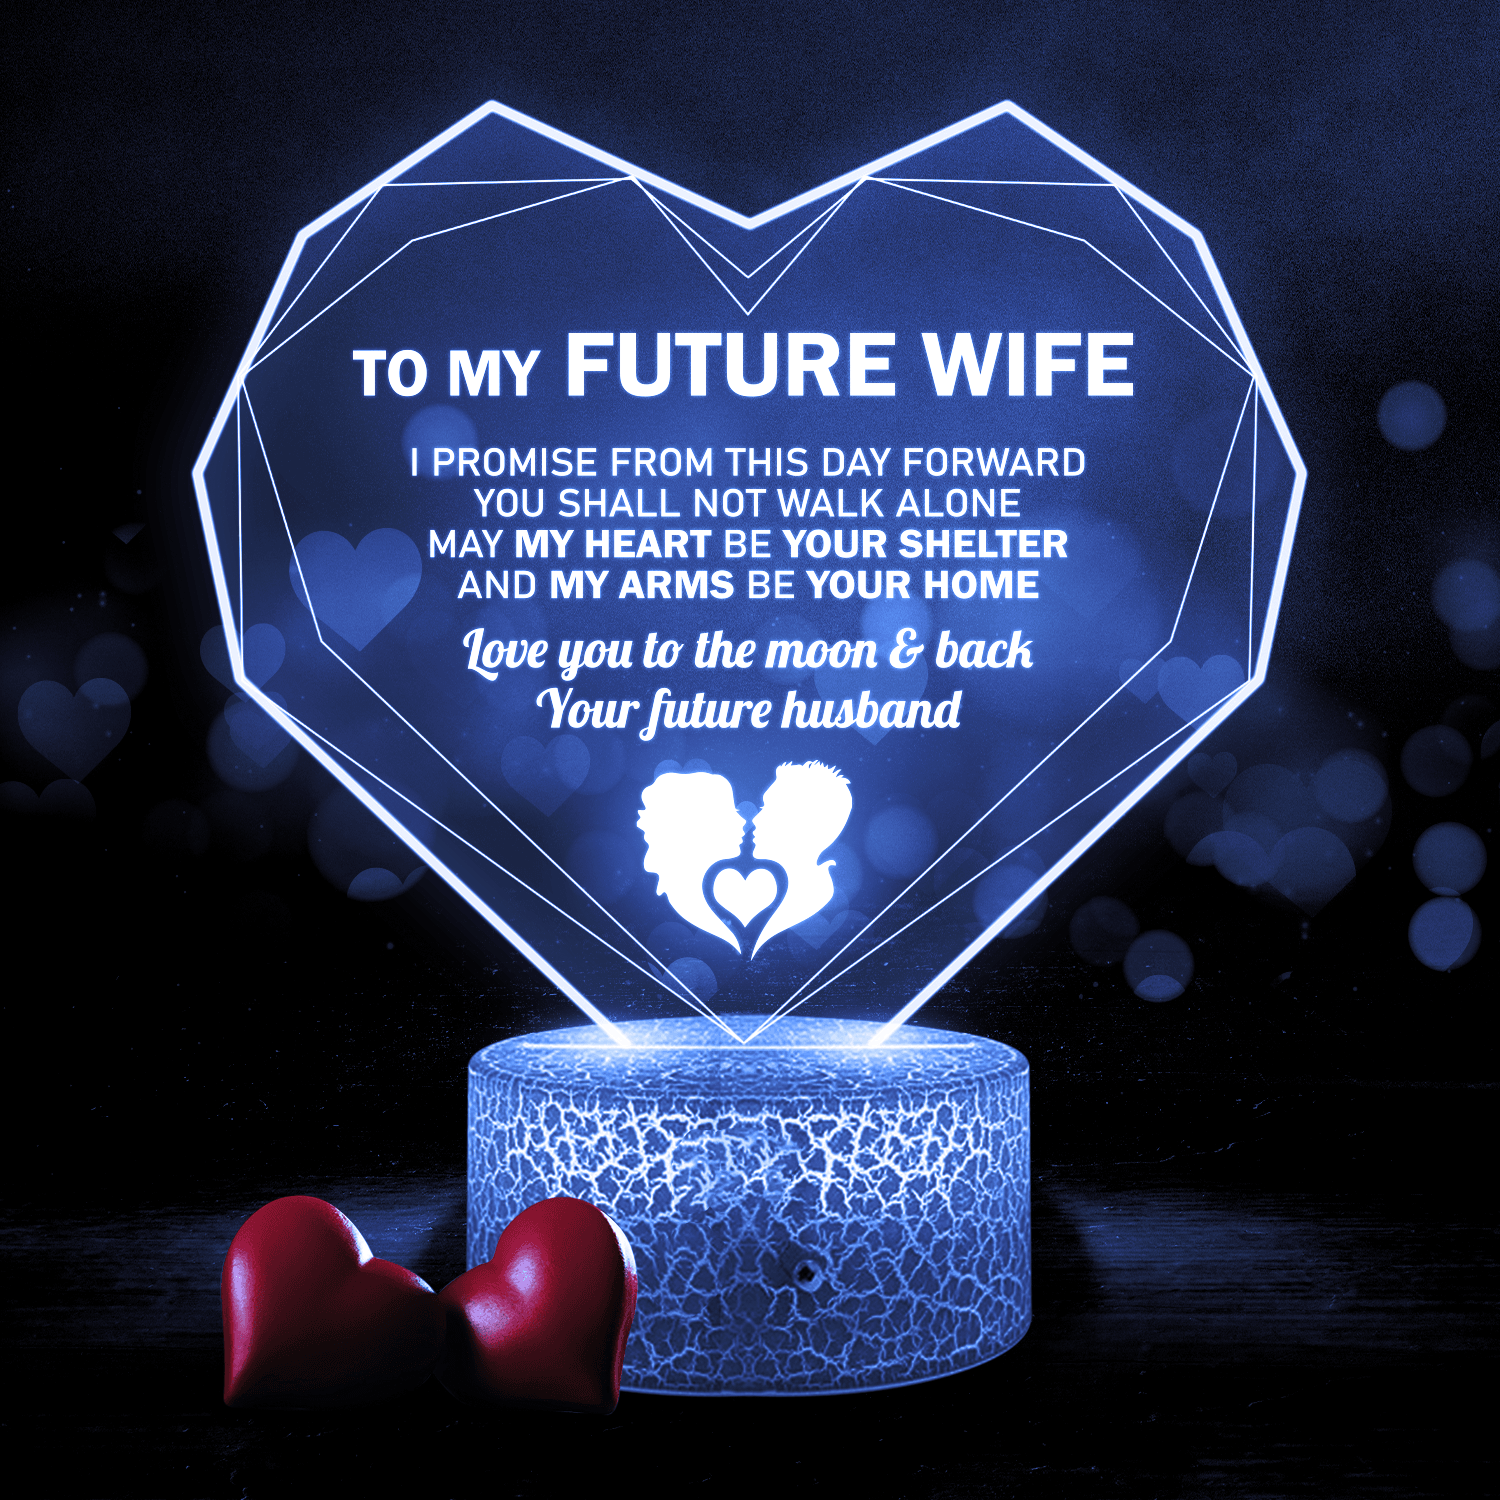 Heart Led Light - Family - To My Future Wife - Love You To The Moon & Back - Auglca25004 - Gifts Holder